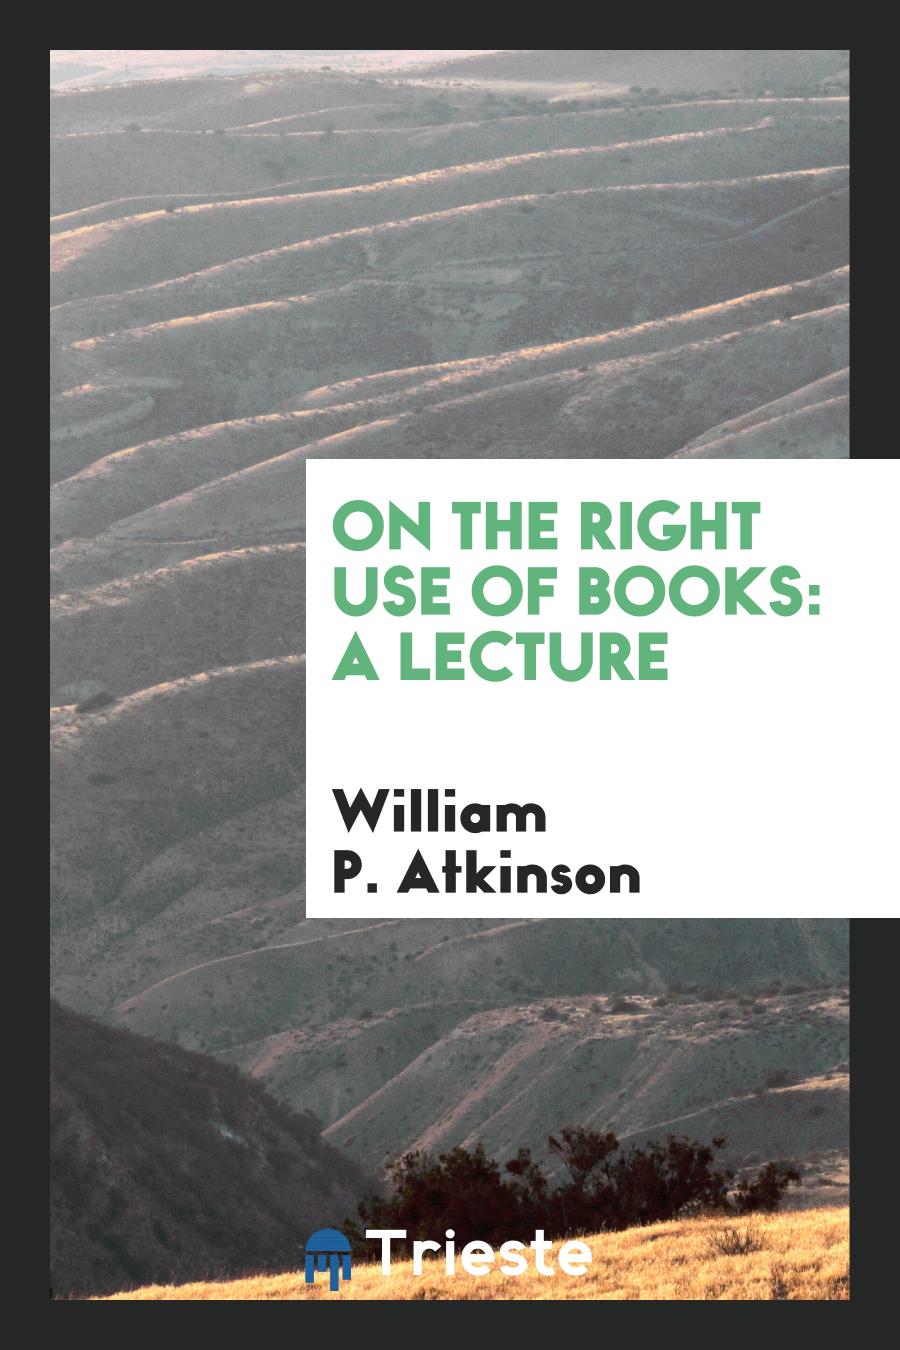 On the Right Use of Books: A Lecture